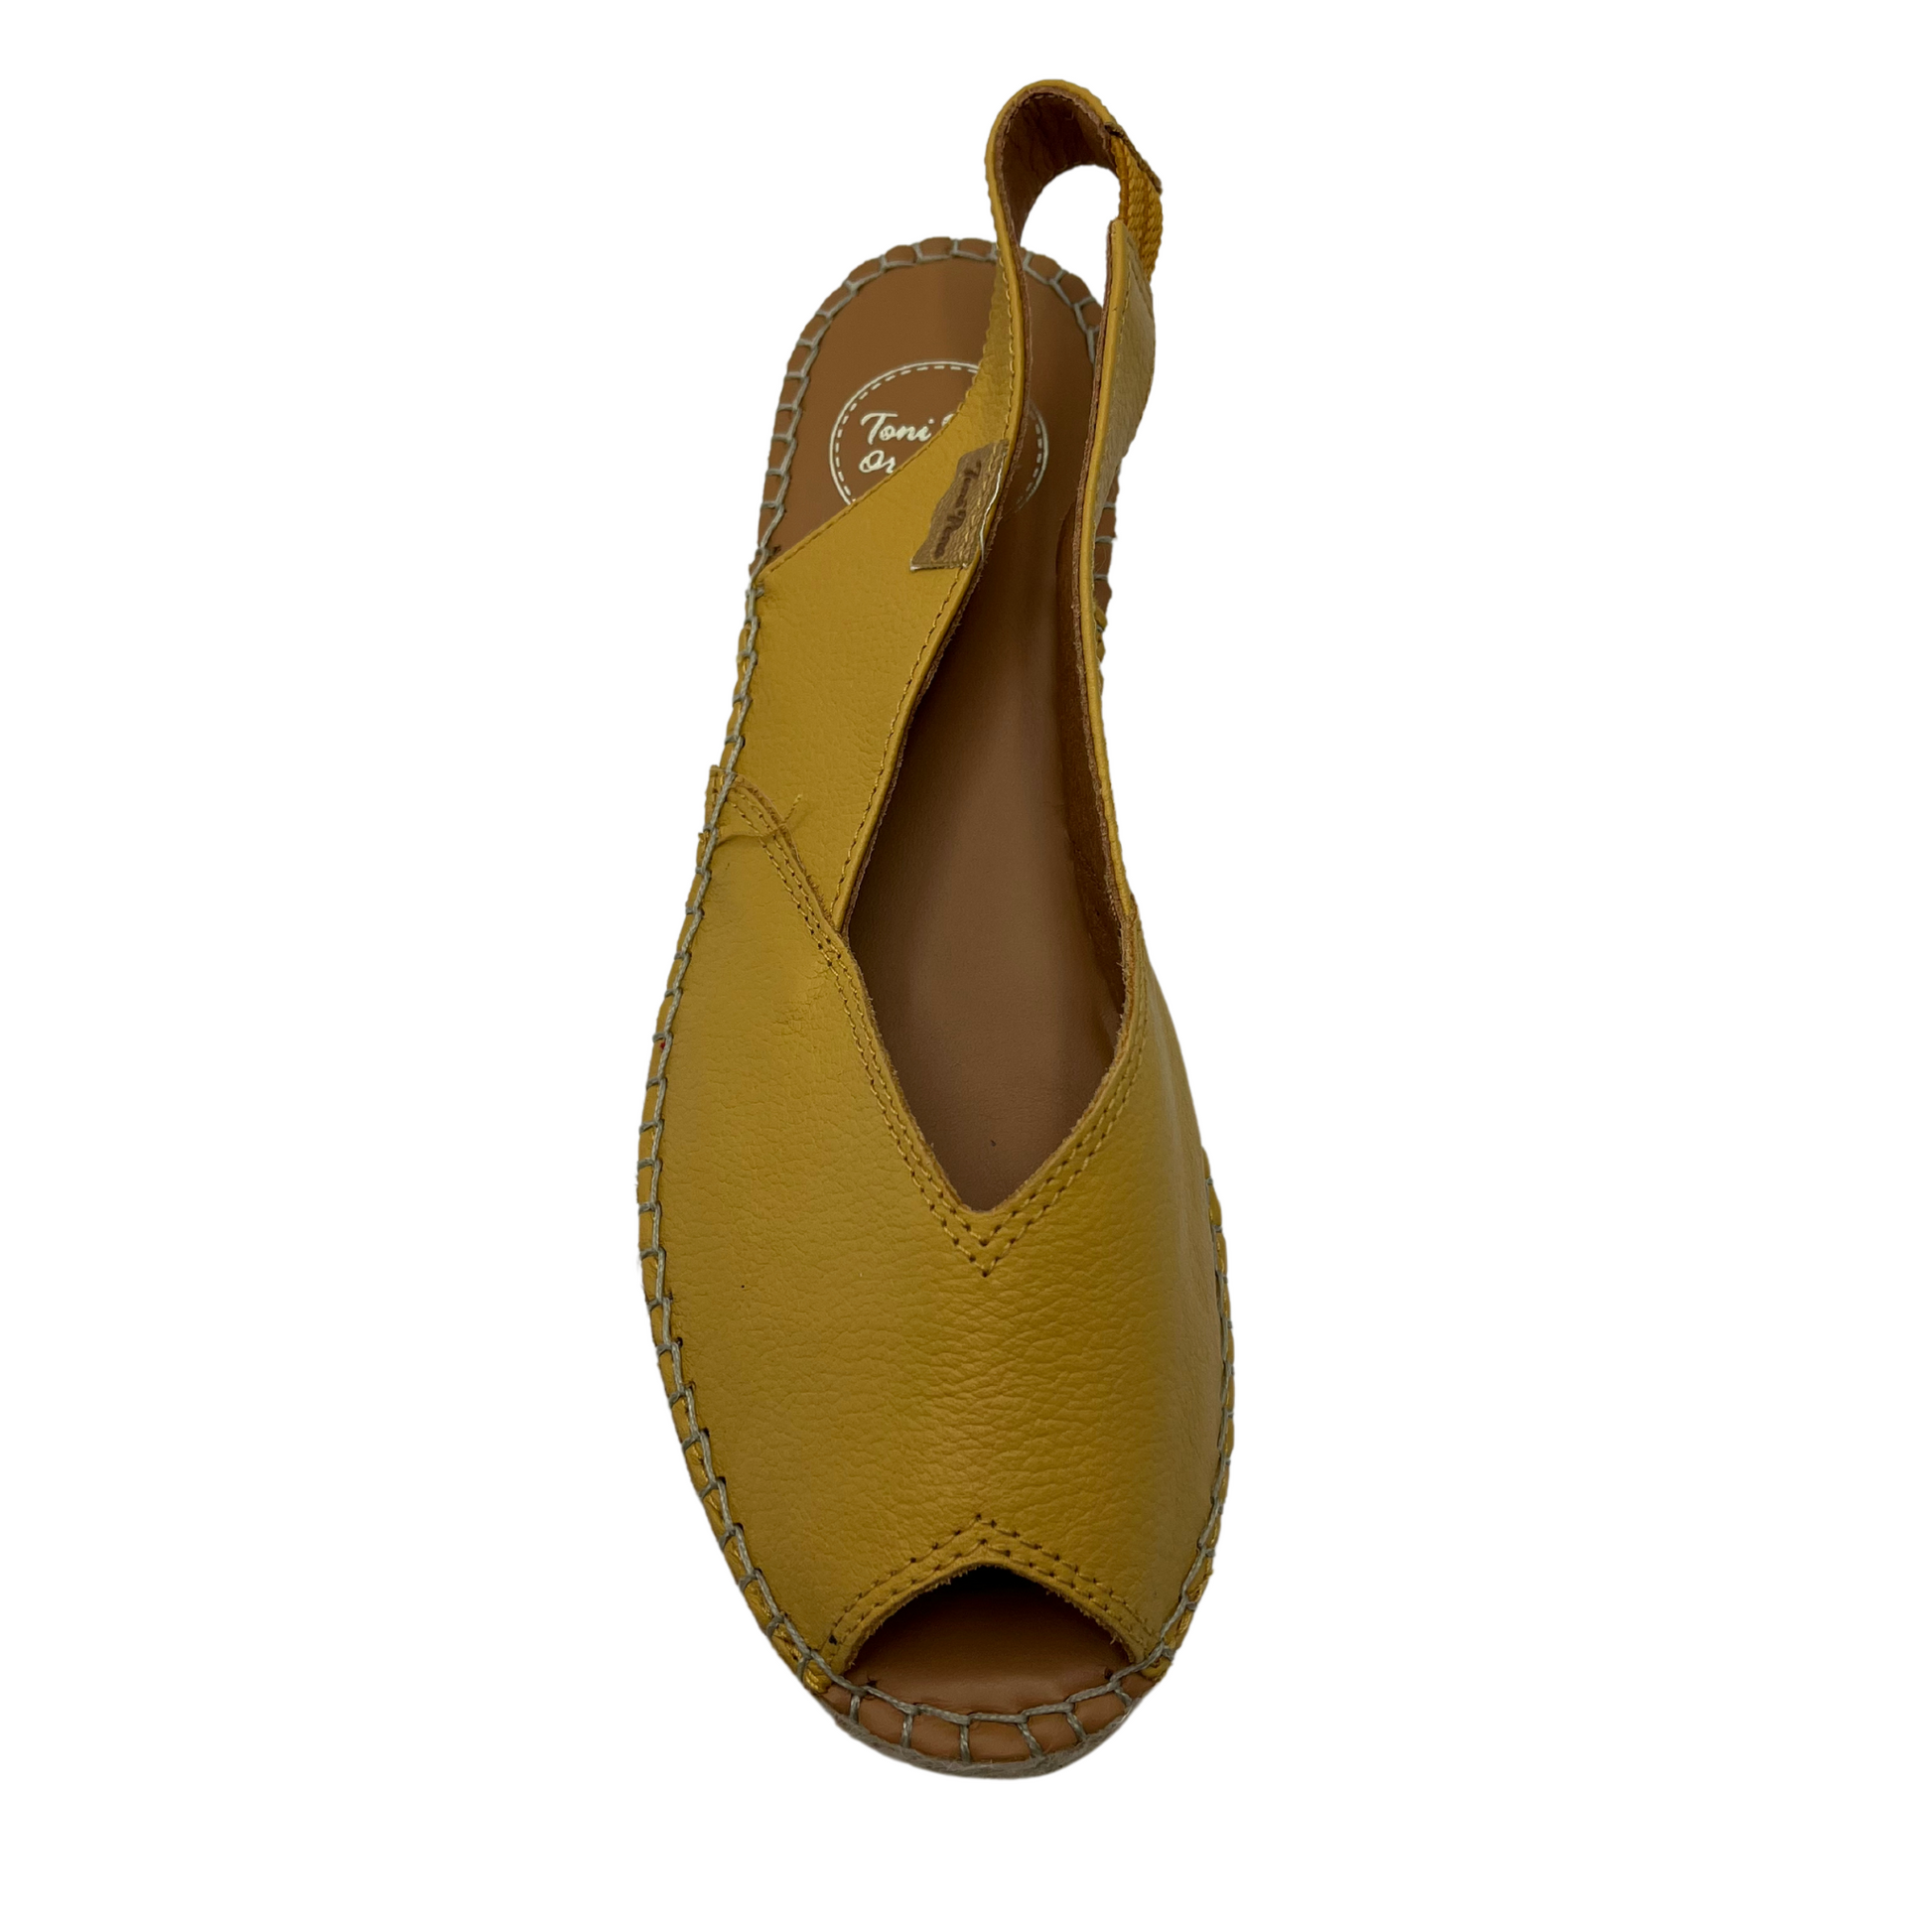 Top view of leather ocre coloured espadrille sandal with peep toe and slingback